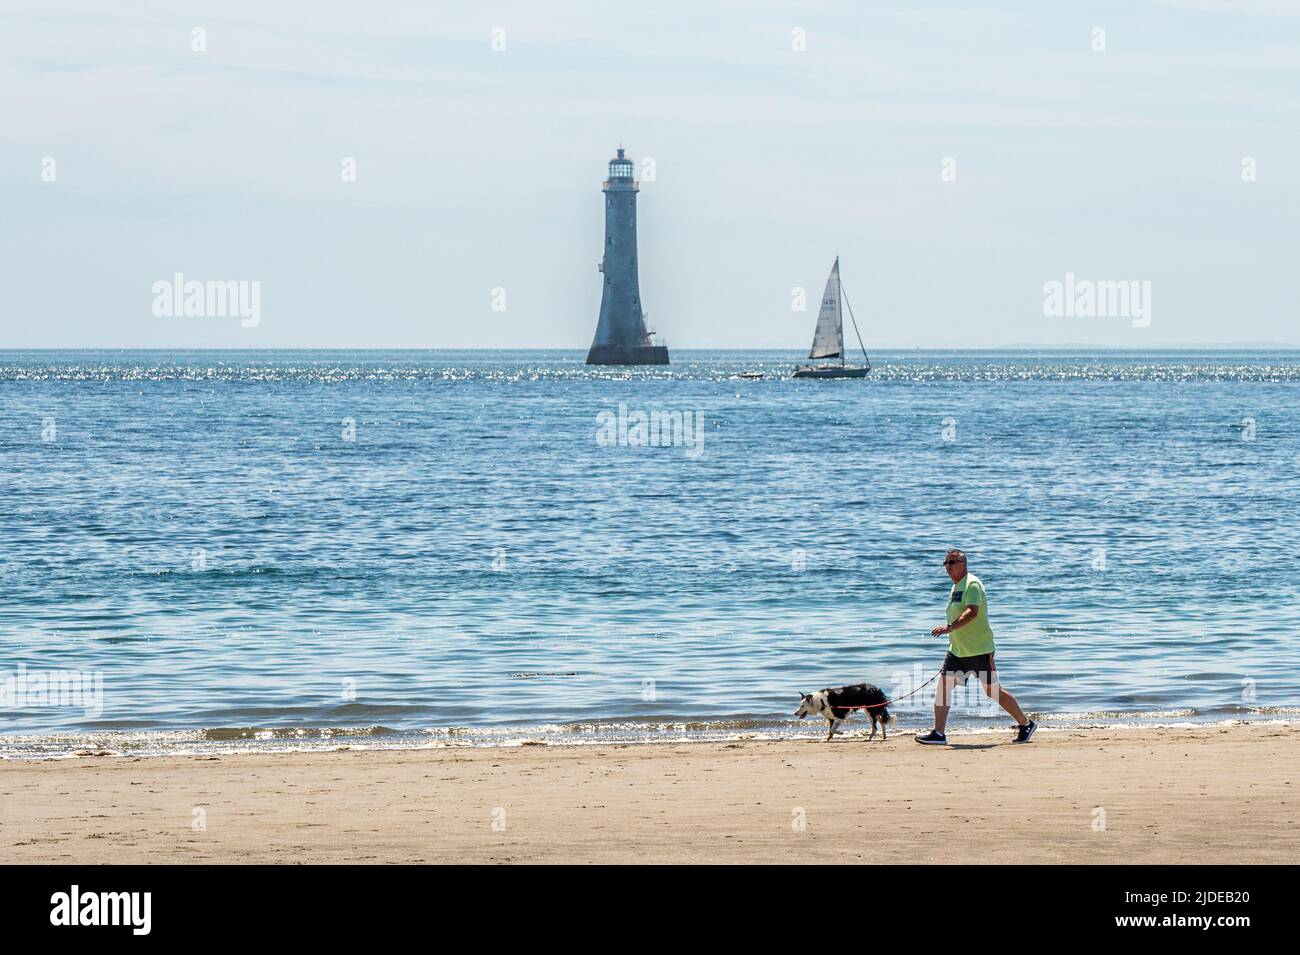 Cranfield, County Down, UK. On a day of sunshine and highs of 20C, many people hit the beaches in Northern Ireland. A man walks his dog along the shoreline of Cranfield Beach with the Haulbowline Lighthouse as a backdrop. Credit: AG News/Alamy Live News Stock Photo